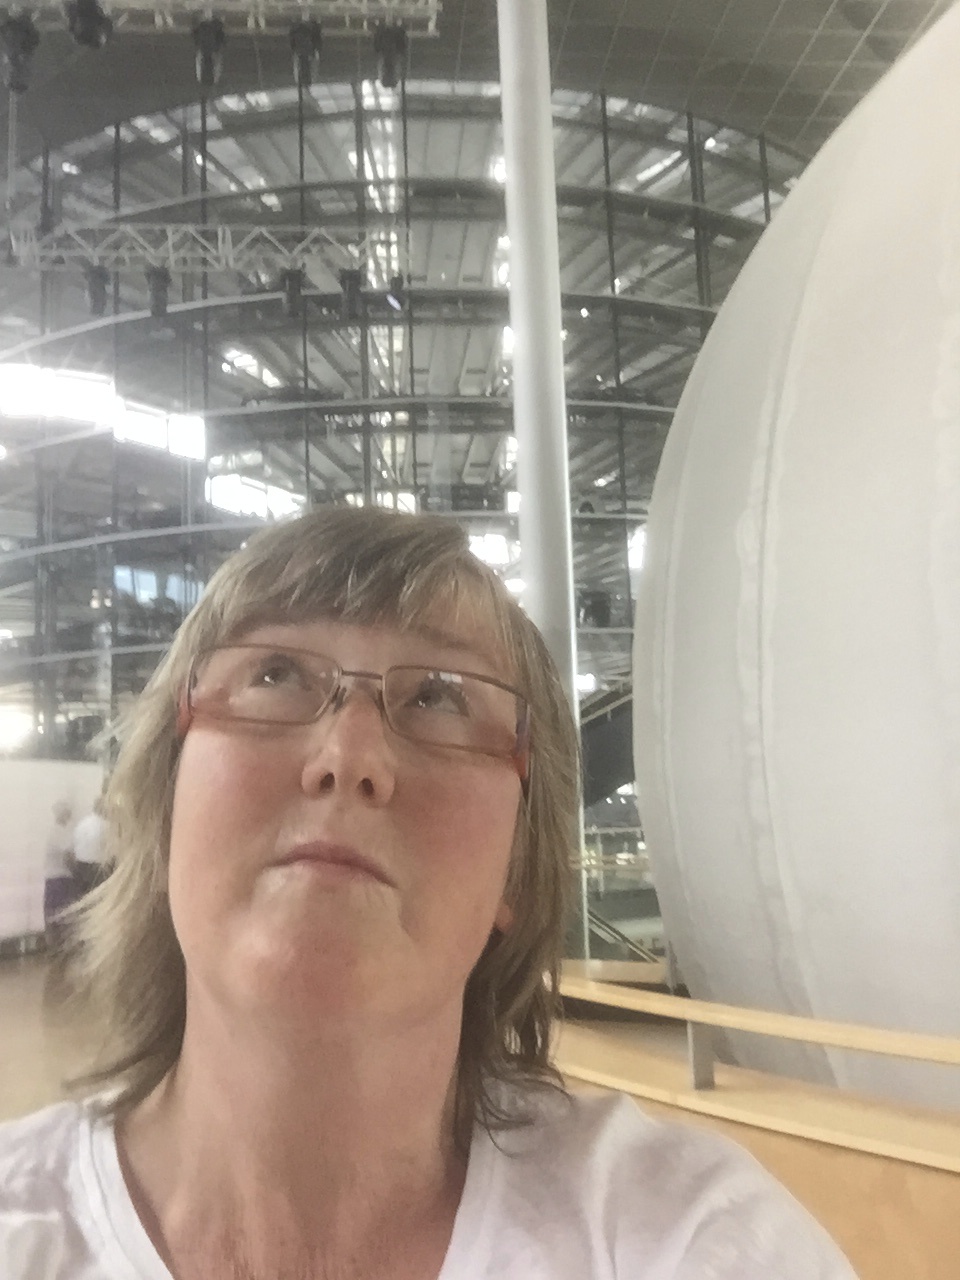 Selfie at the mostly automated Volkswagen glass factory in Dresden